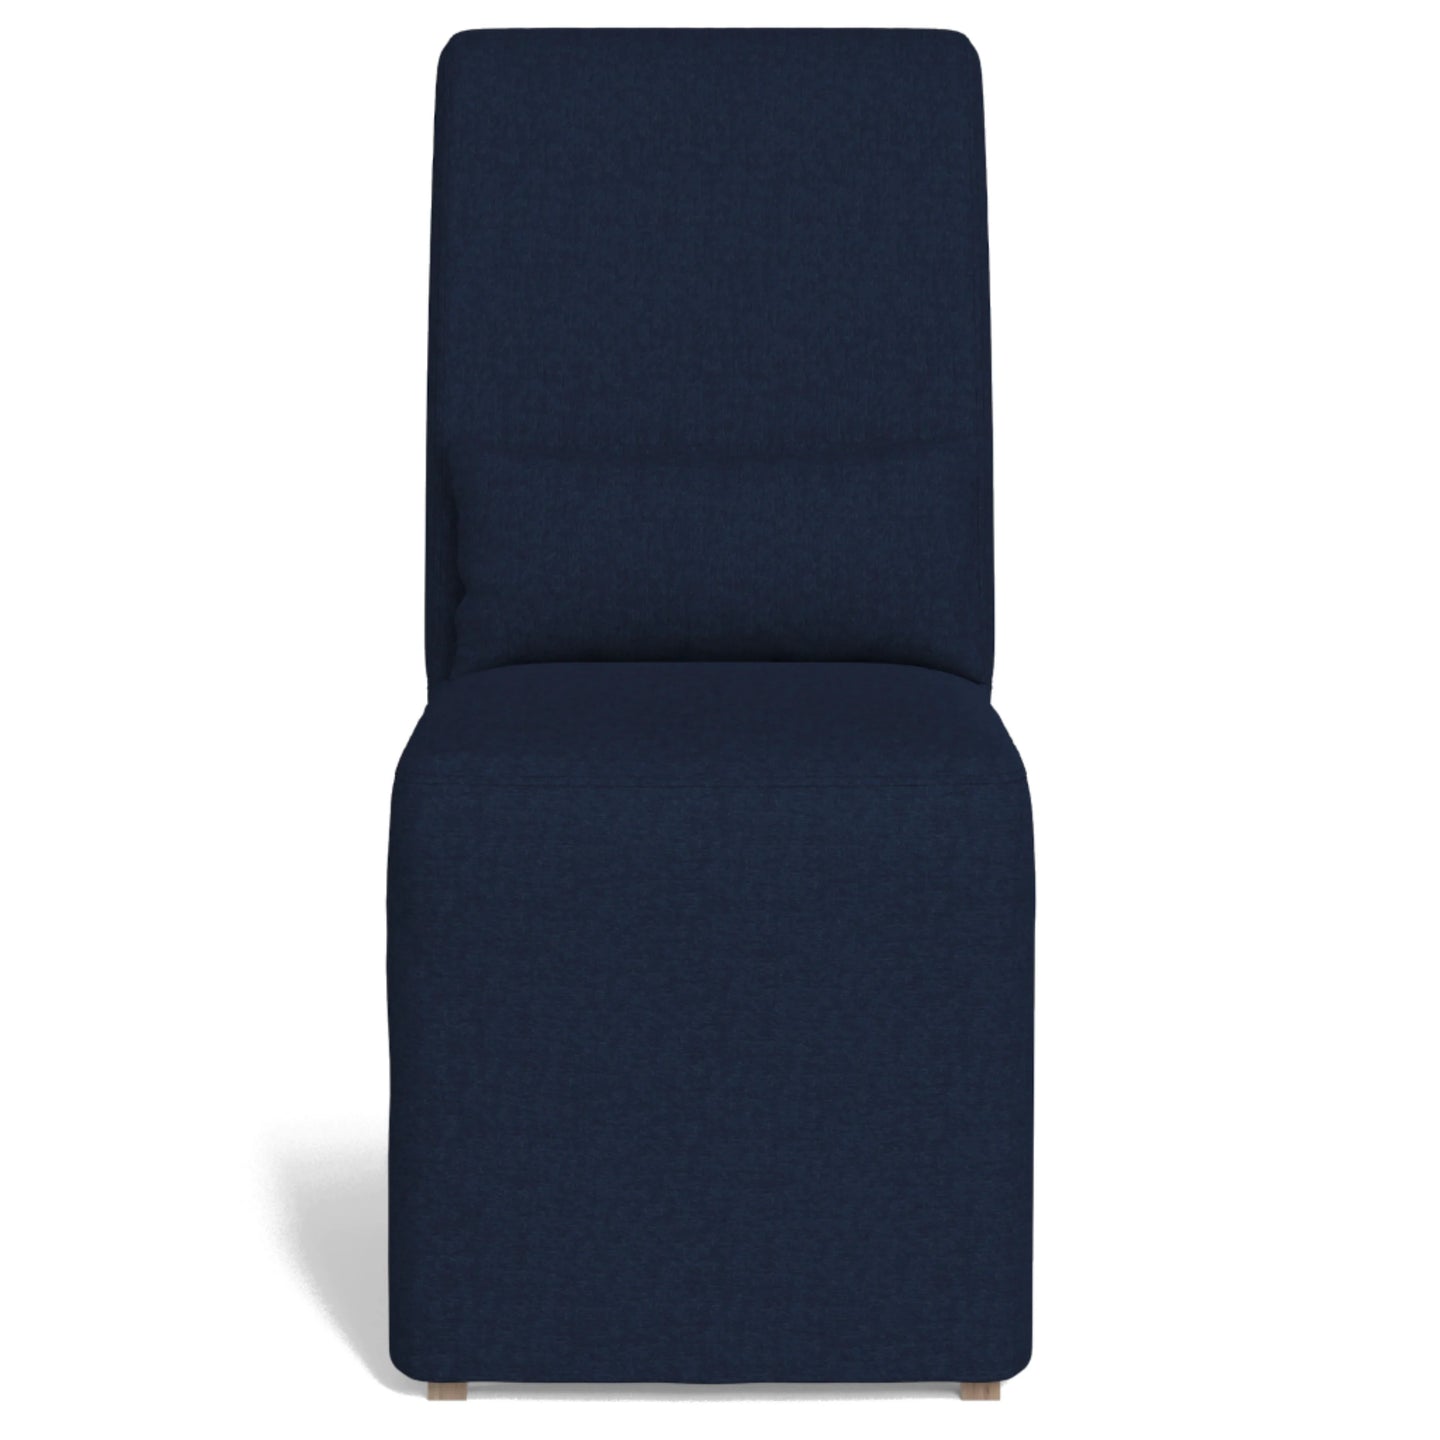 Sunset Trading Newport Slipcovered Dining Chair | Stain Resistant Performance Fabric | Navy Blue